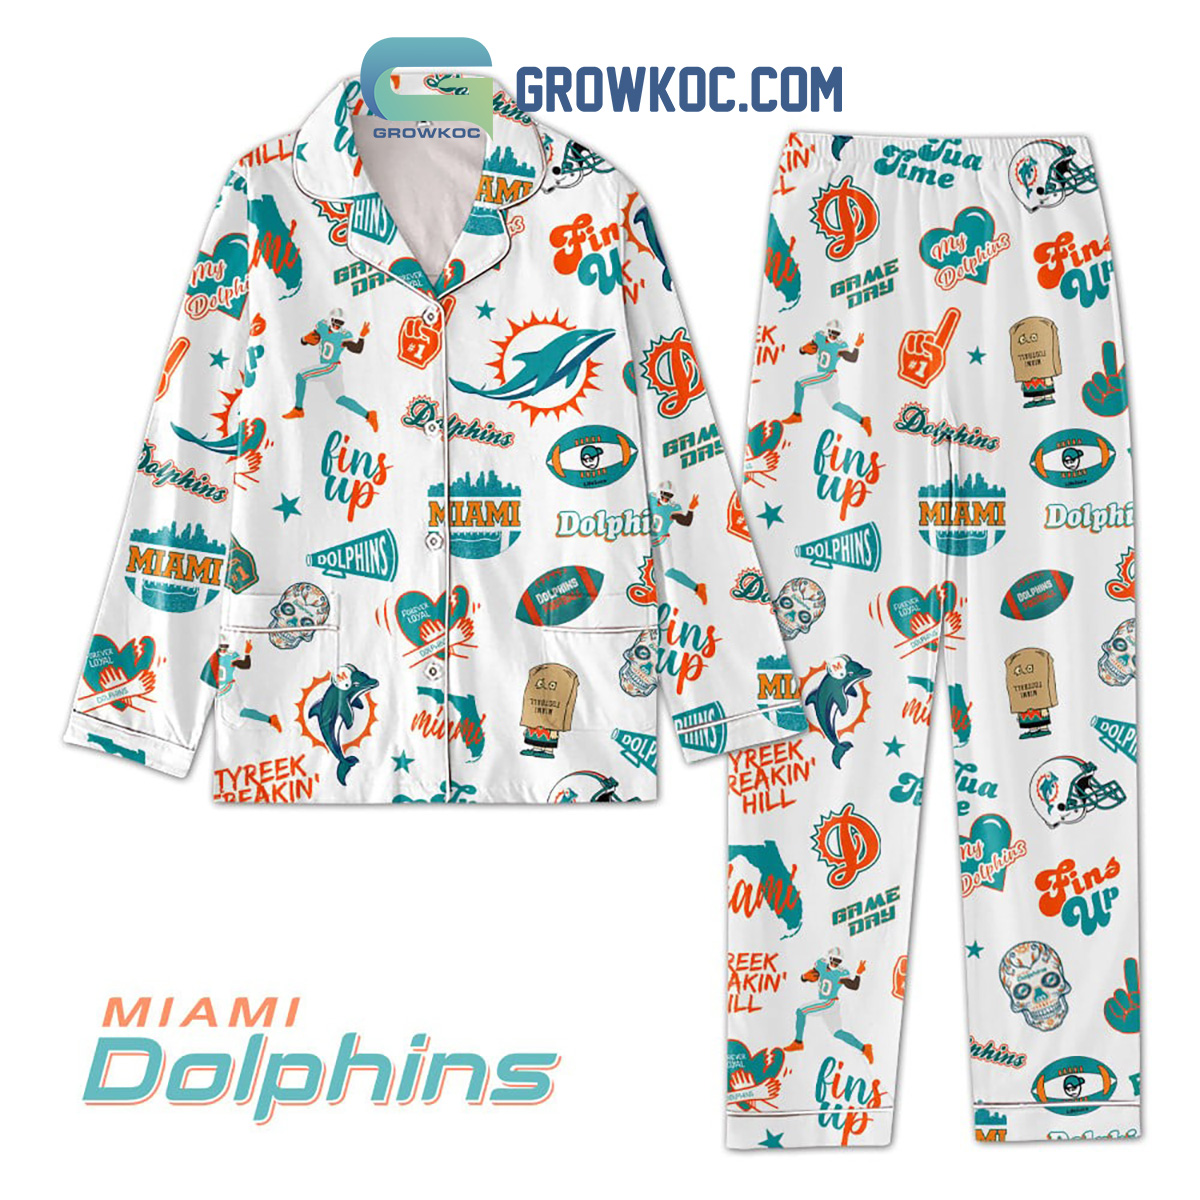 Miami Dolphins Fins Up Game Day Pajamas Sets